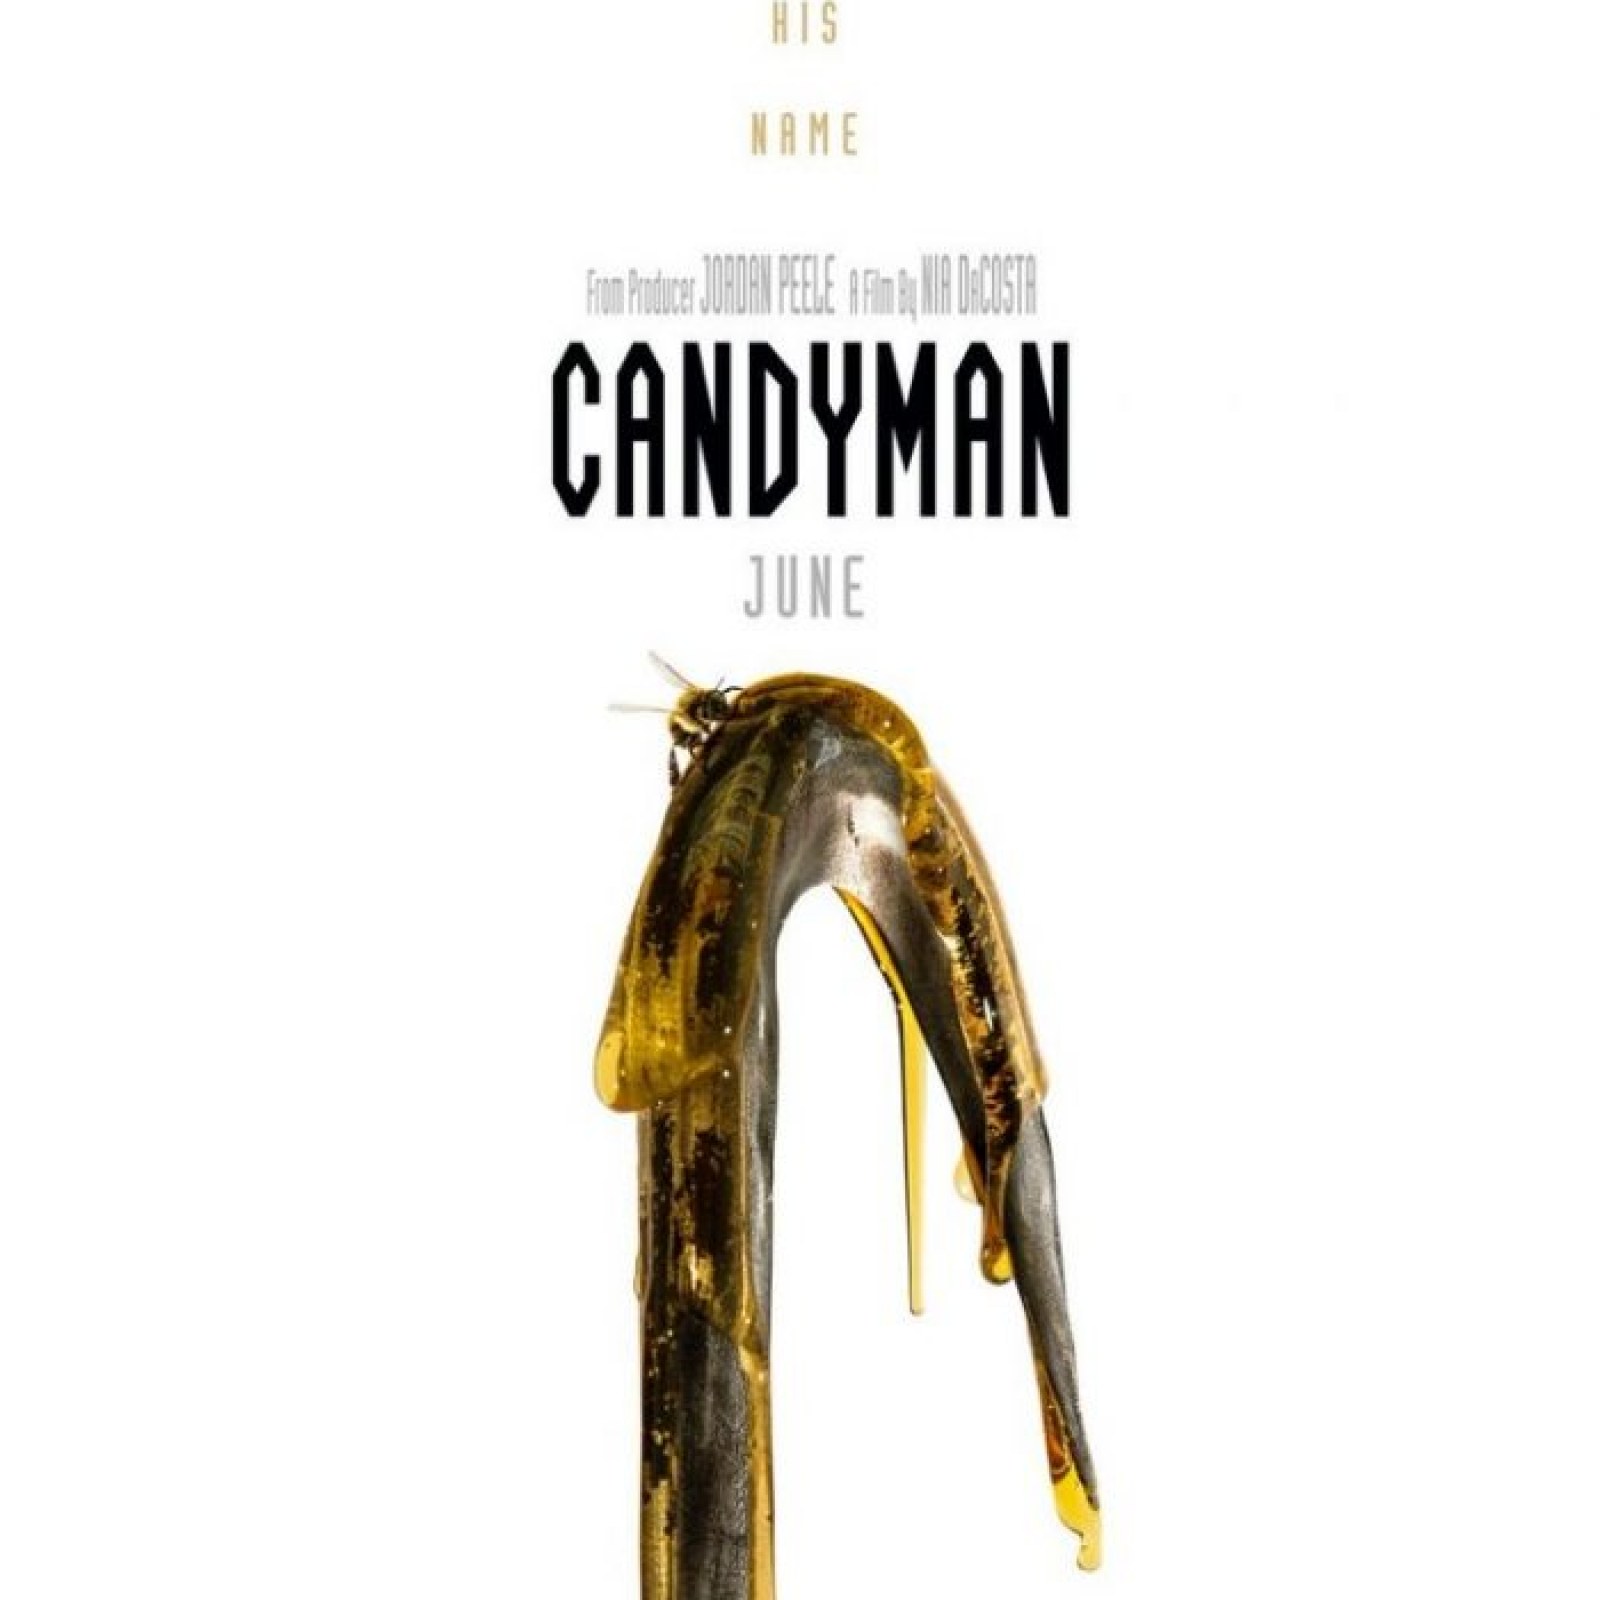 How Does the New 'Candyman' Compare to the for the 1992 Original?